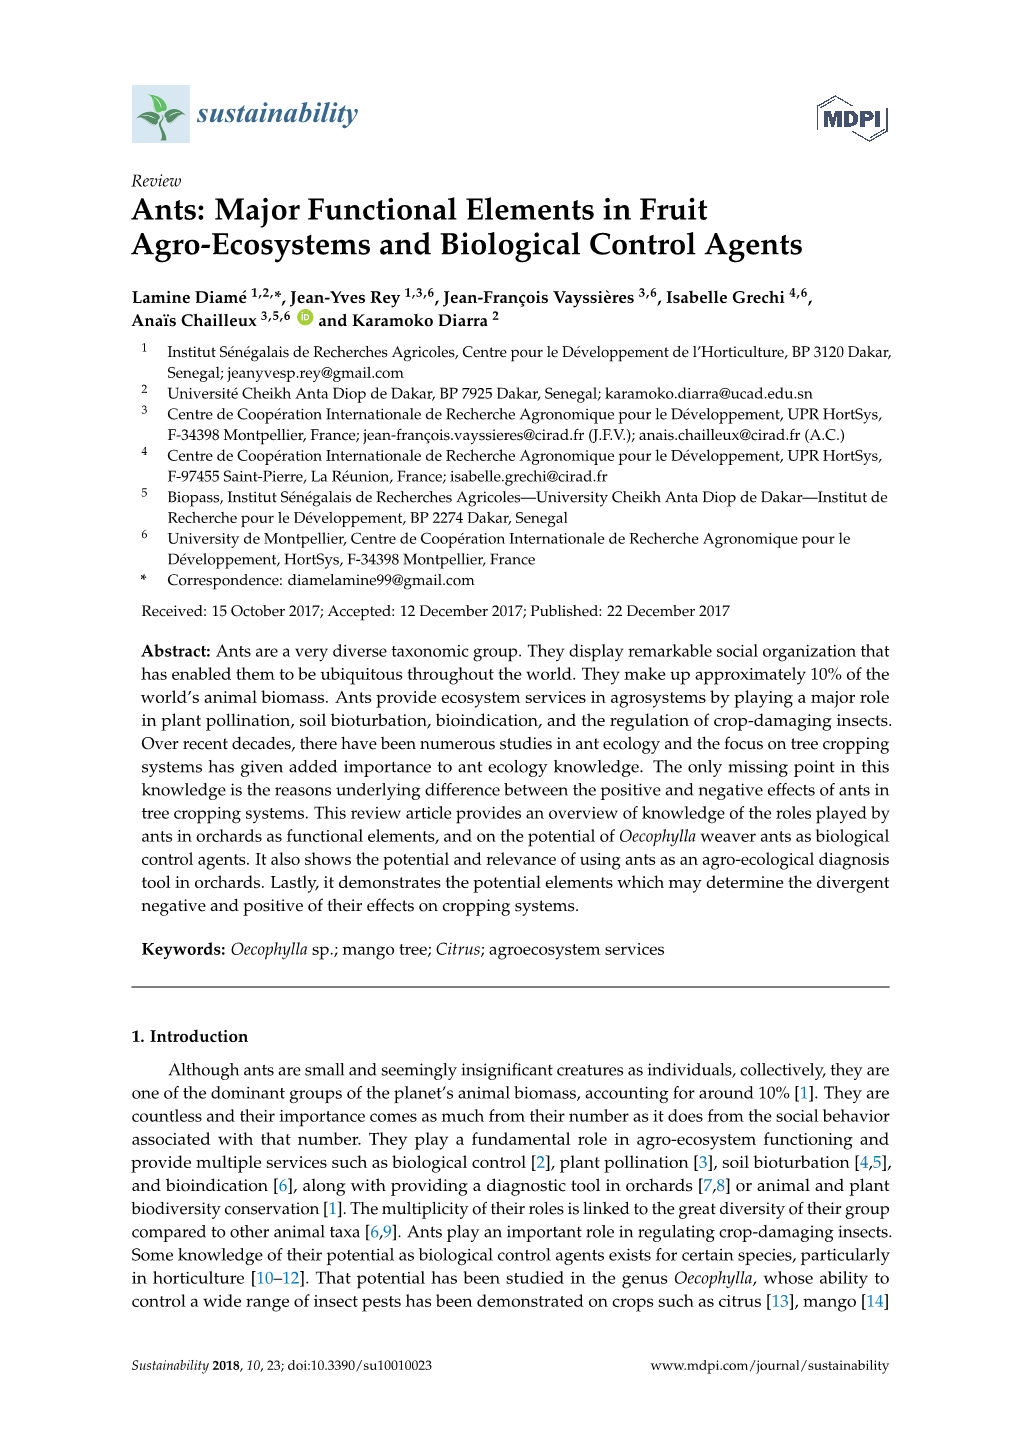 Ants: Major Functional Elements in Fruit Agro-Ecosystems and Biological Control Agents